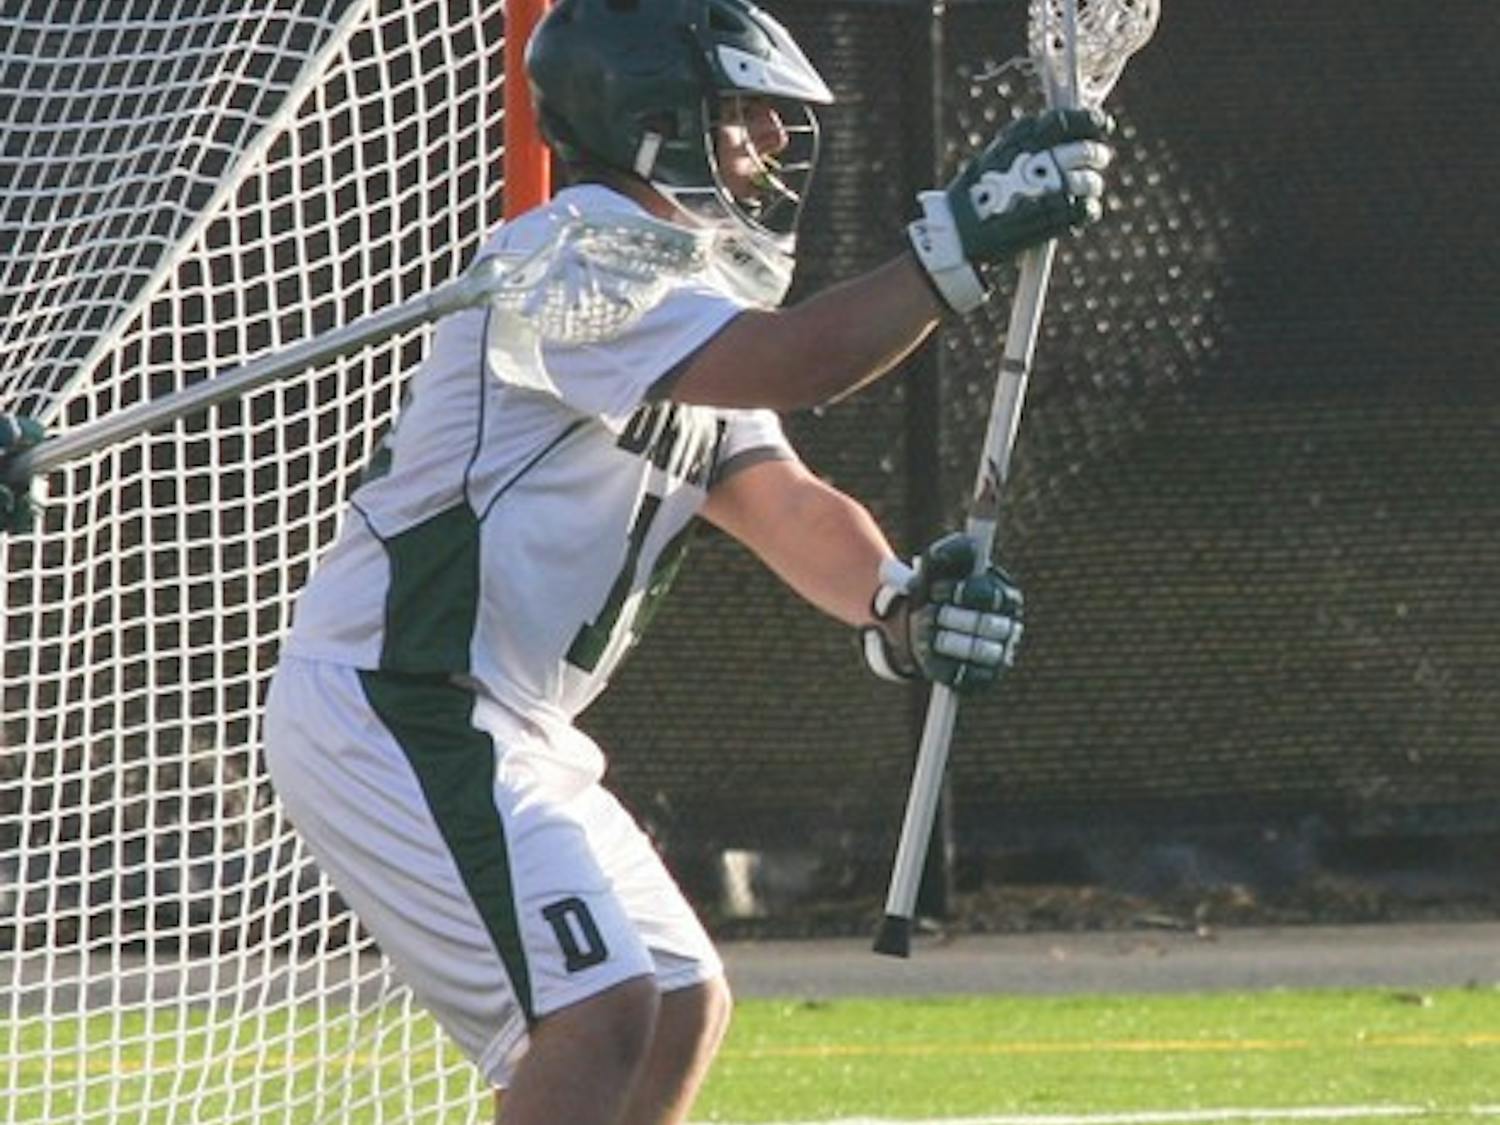 Mike Novosel '10 saved 11 of 24 shots on goal, and men's lacrosse earned its first Ivy League win with a 17-14 victory over Yale Wednesday afternoon.